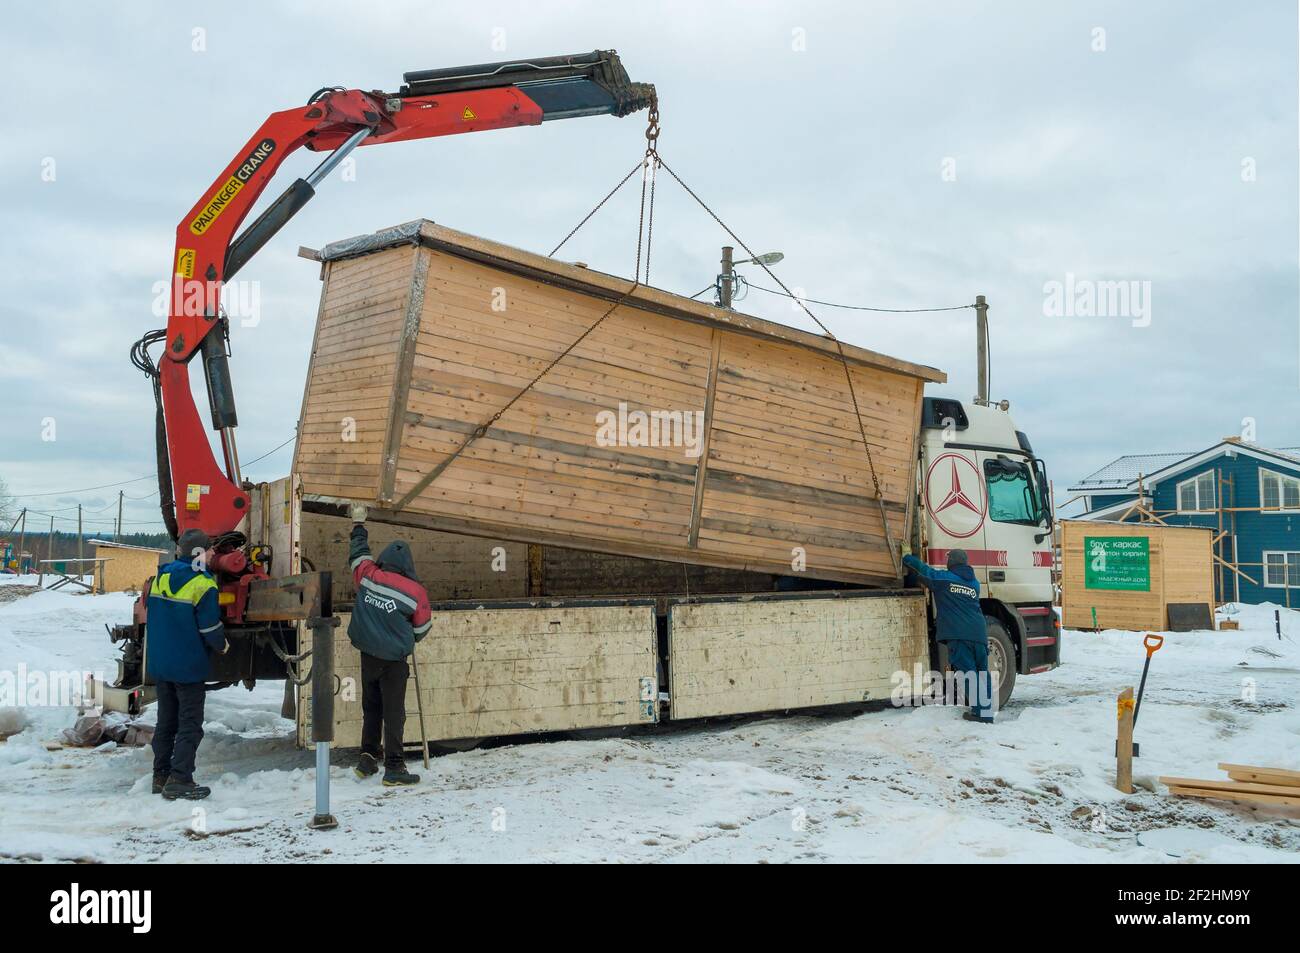 LENINGRAD REGION, RUSSIA - MARCH 04, 2021: Loading of a construction house on a Mercedes-Benz Actros truck with a manipulator crane Stock Photo